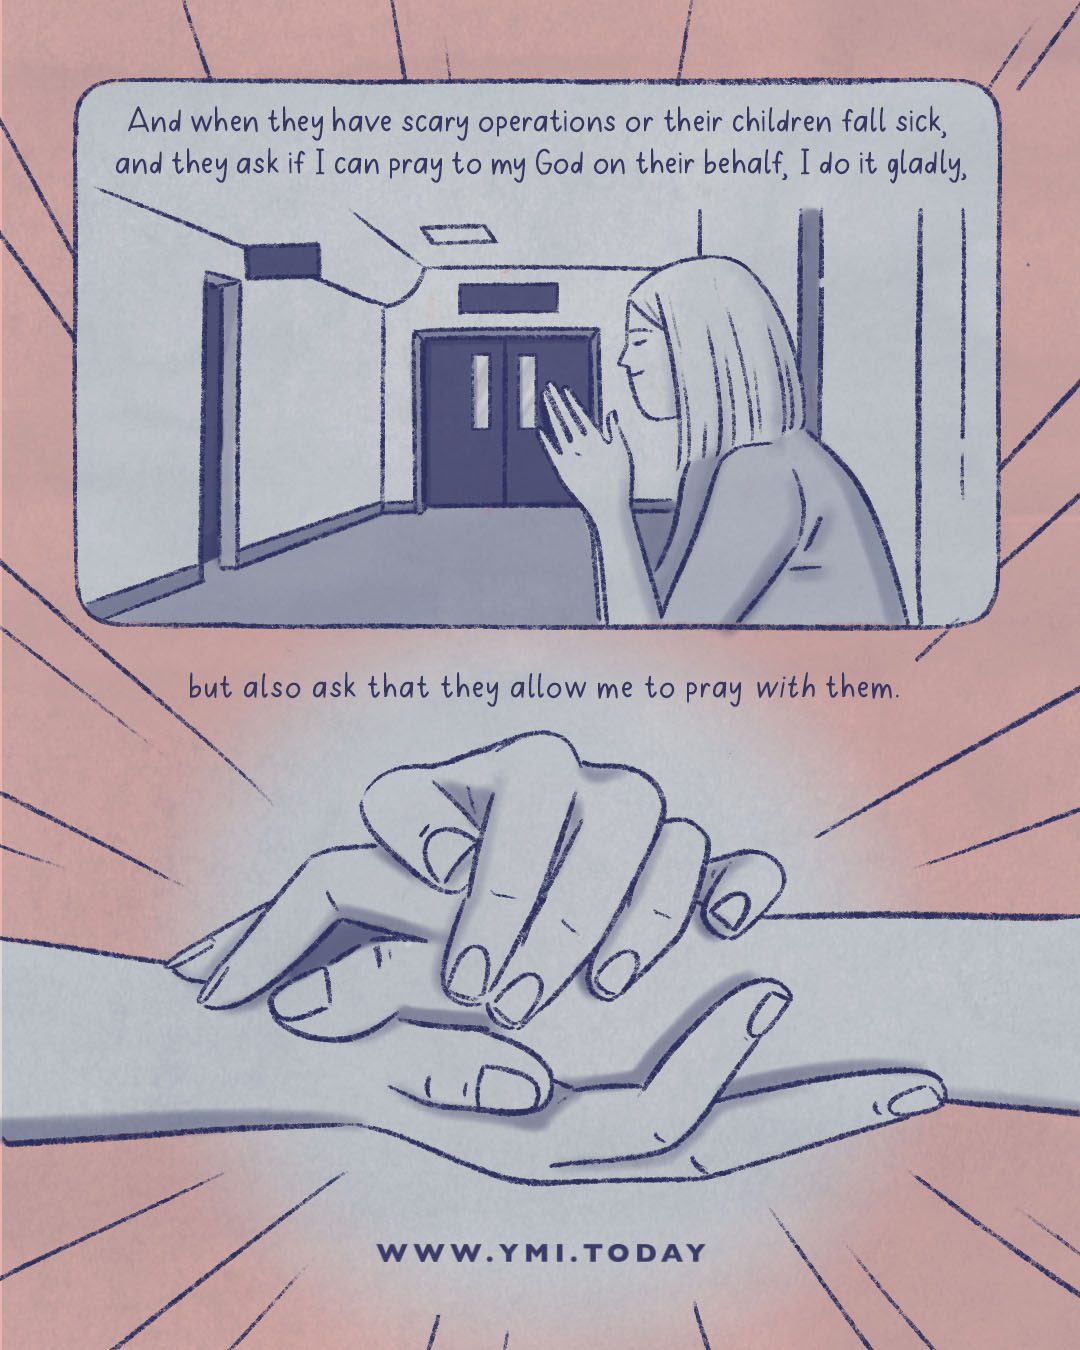 2 panel comic: woman praying in a hospital corridor, and close up of woman praying hand in hand with another person